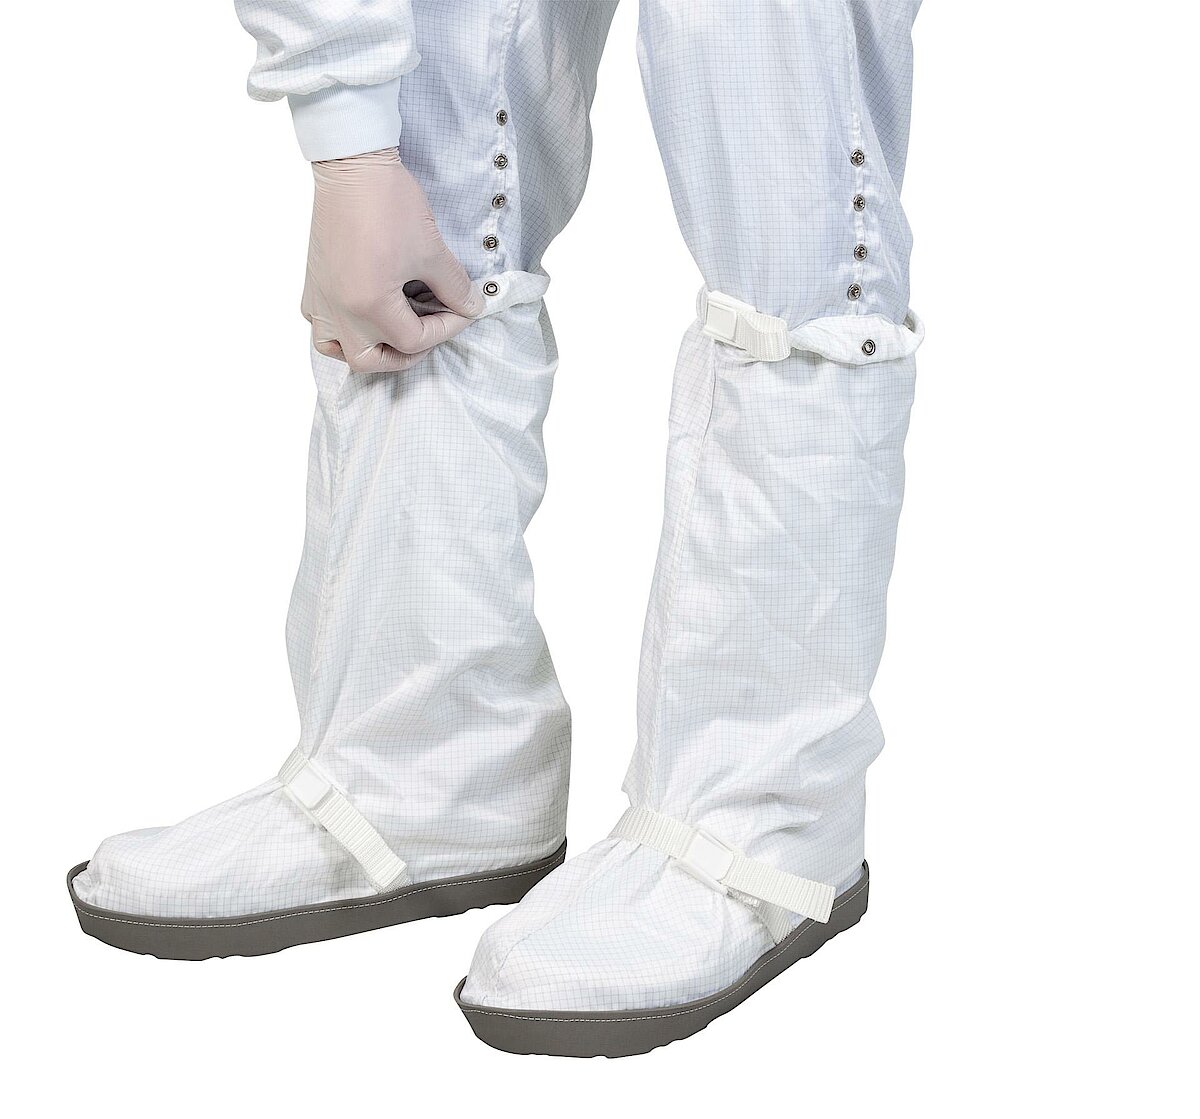 Cleanroom reusable overboots with antistatic rubber sole